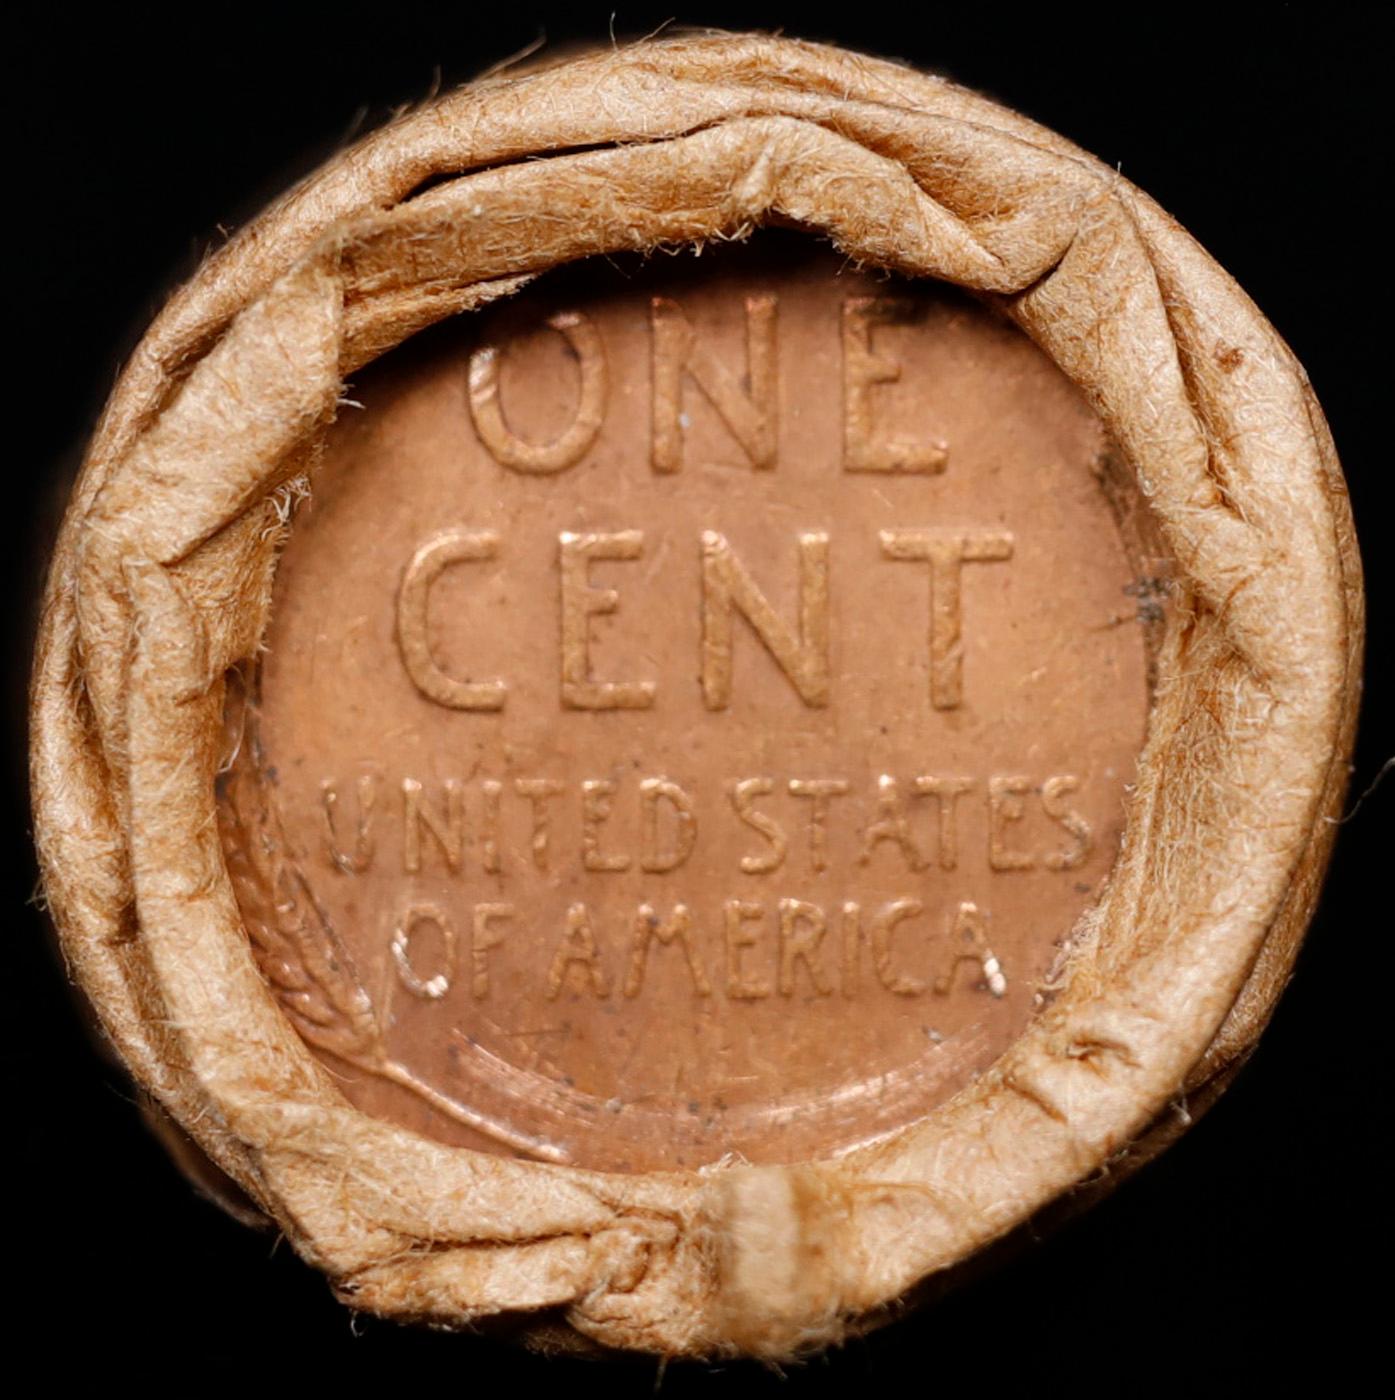 Lincoln Wheat Cent 1c Mixed Roll Orig Brandt McDonalds Wrapper, 1917-s end, Wheat other end